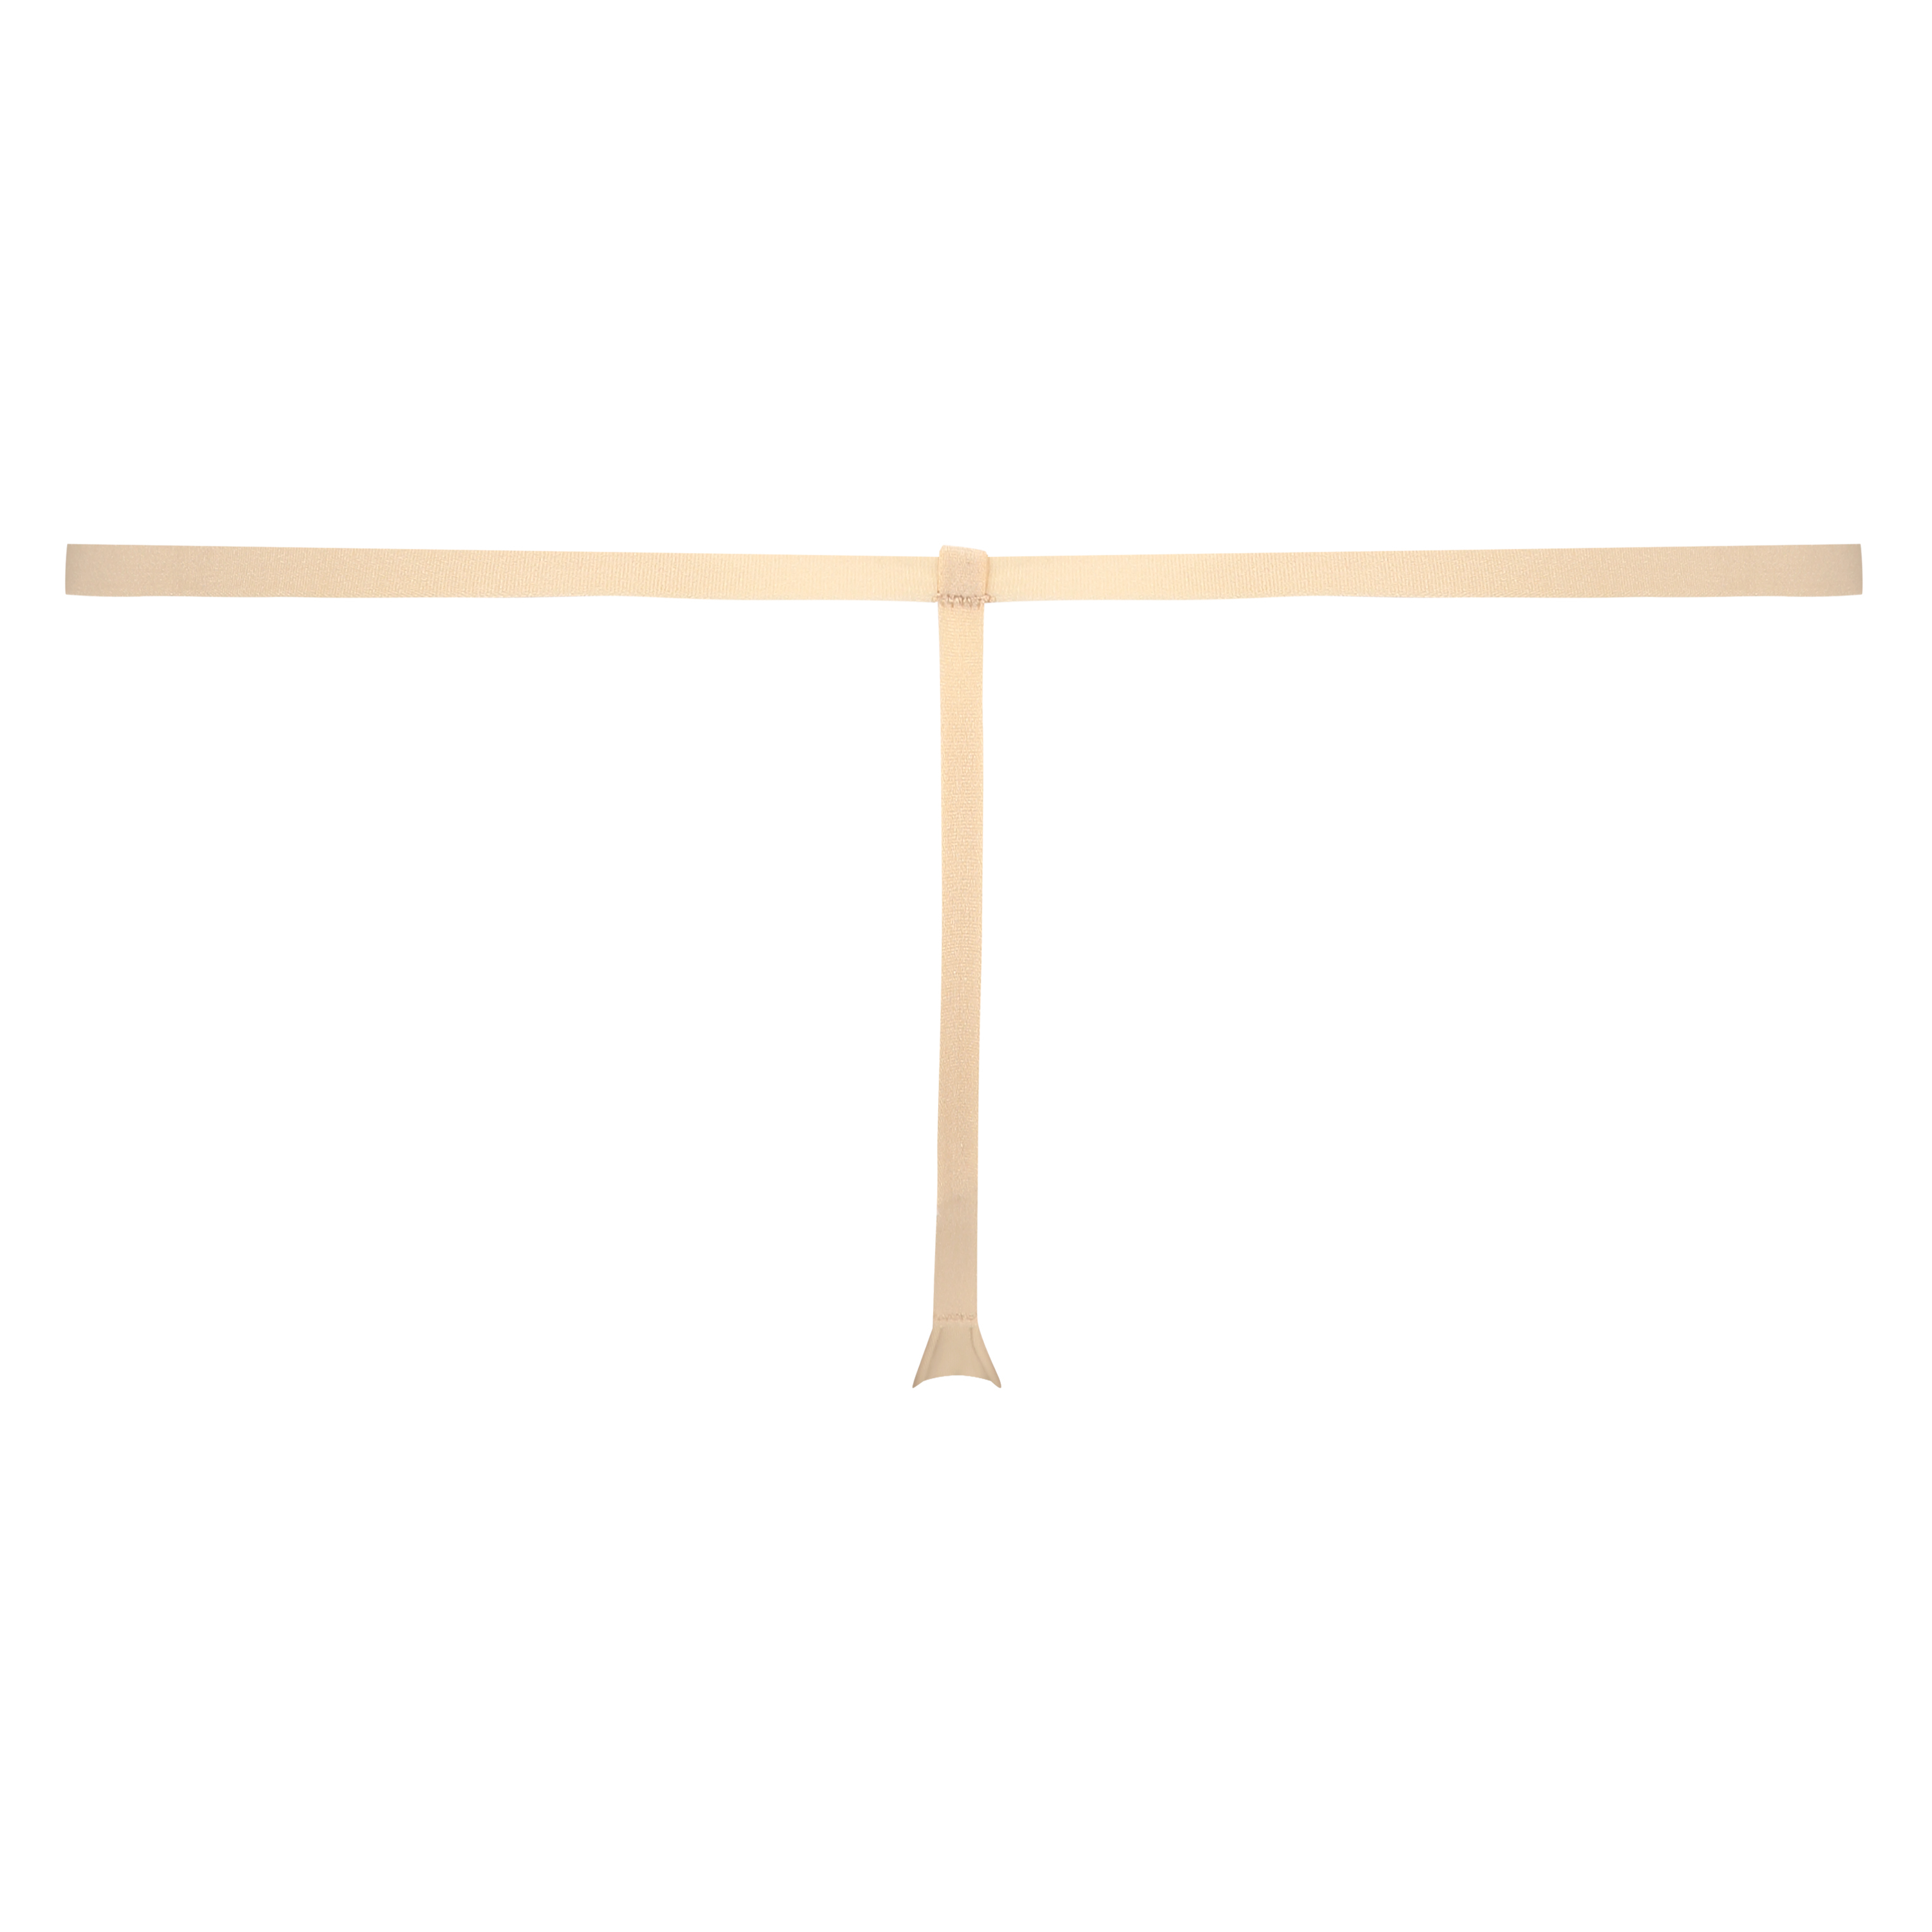 Invisible T-String Micro, Beige, main